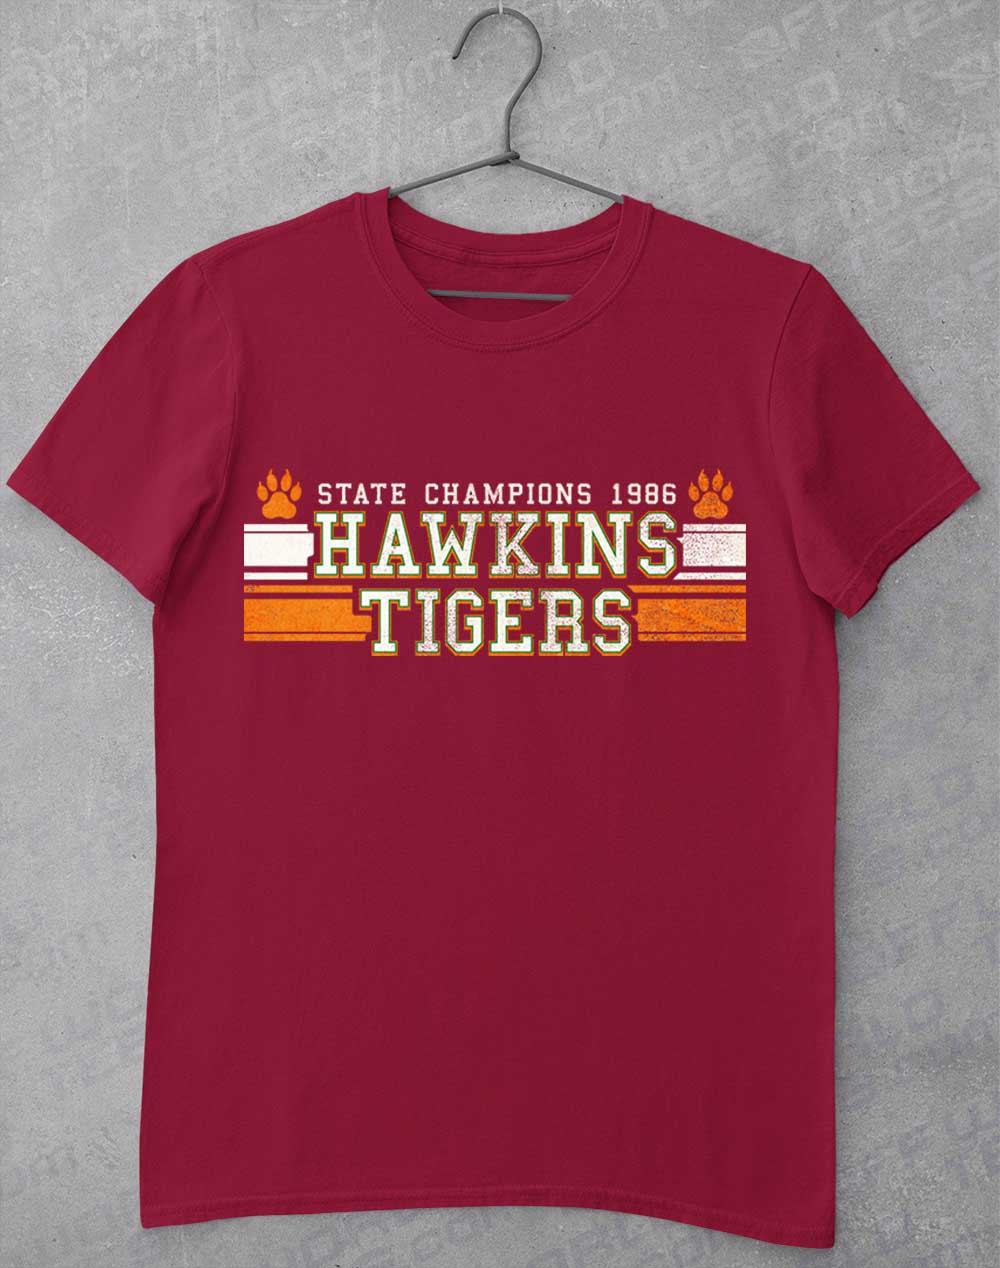 Cardinal Red - Hawkins Tigers State Champs 1986 T-Shirt